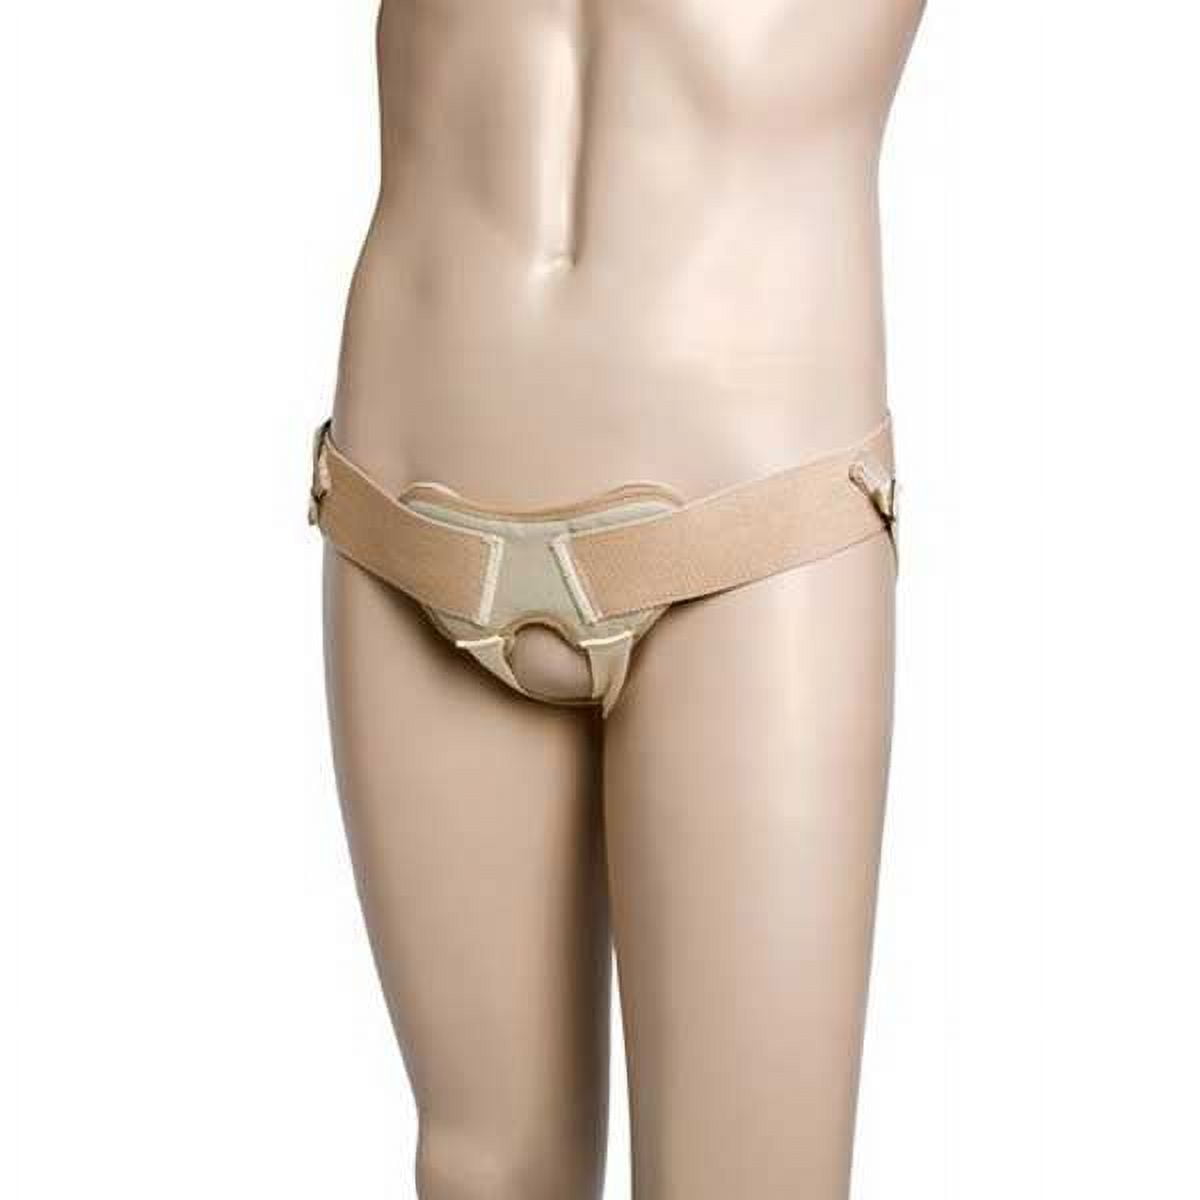 Hernia Gear Suspensory Scrotal Support - XL